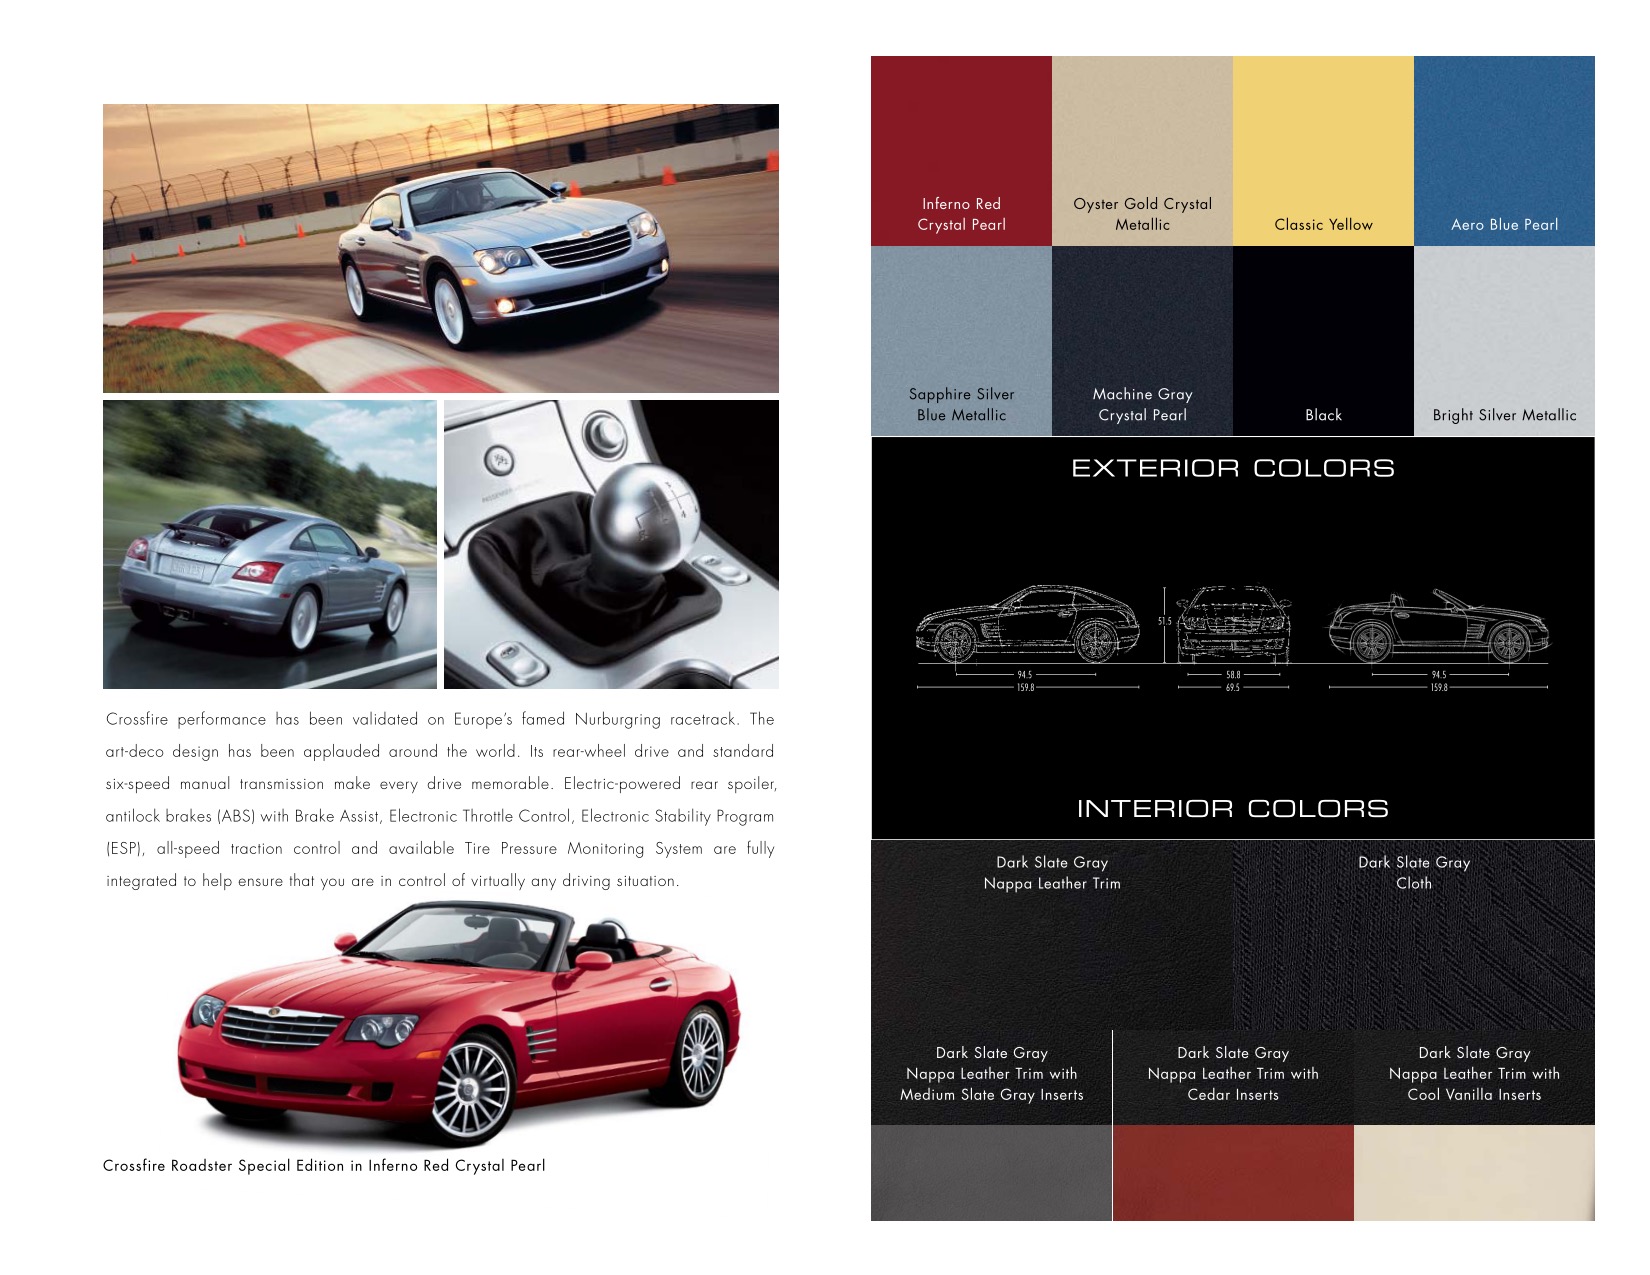 2008 Chrysler Crossfire Brochure Page 1